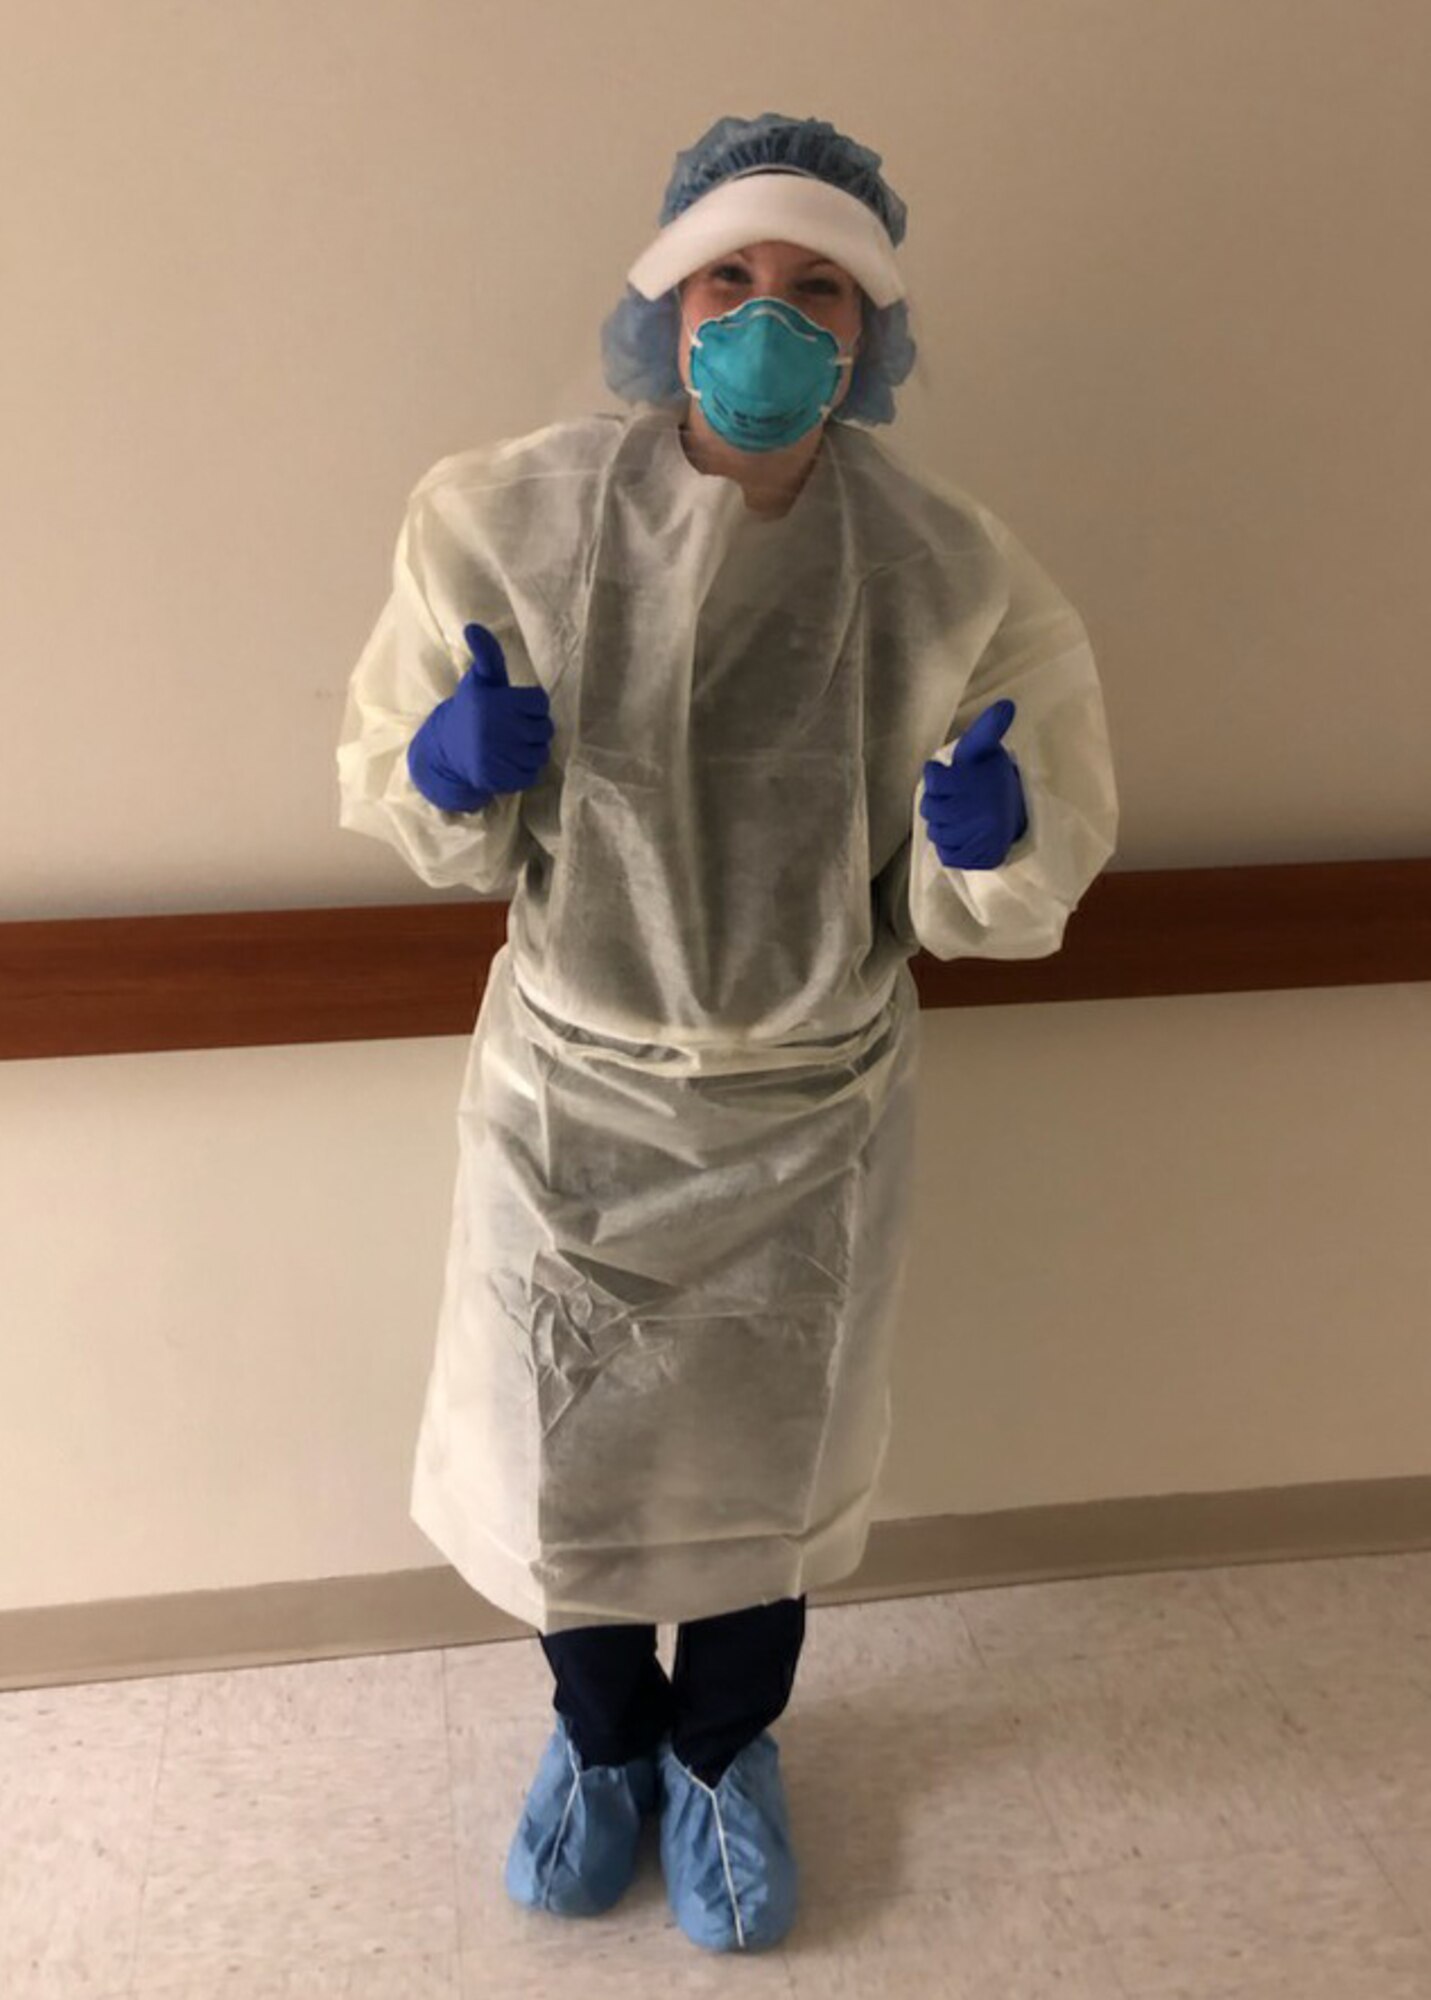 Danielle Allaire, a travel nurse in her civlian life, dresses for patient care before entering the room of a COVID-19 patient. Allaire is a master sergeant in the 403rd Aerial Port Squadron as a air transportation specialist and passenger serviices noncommissioned officer in charge. (courtesy photo)